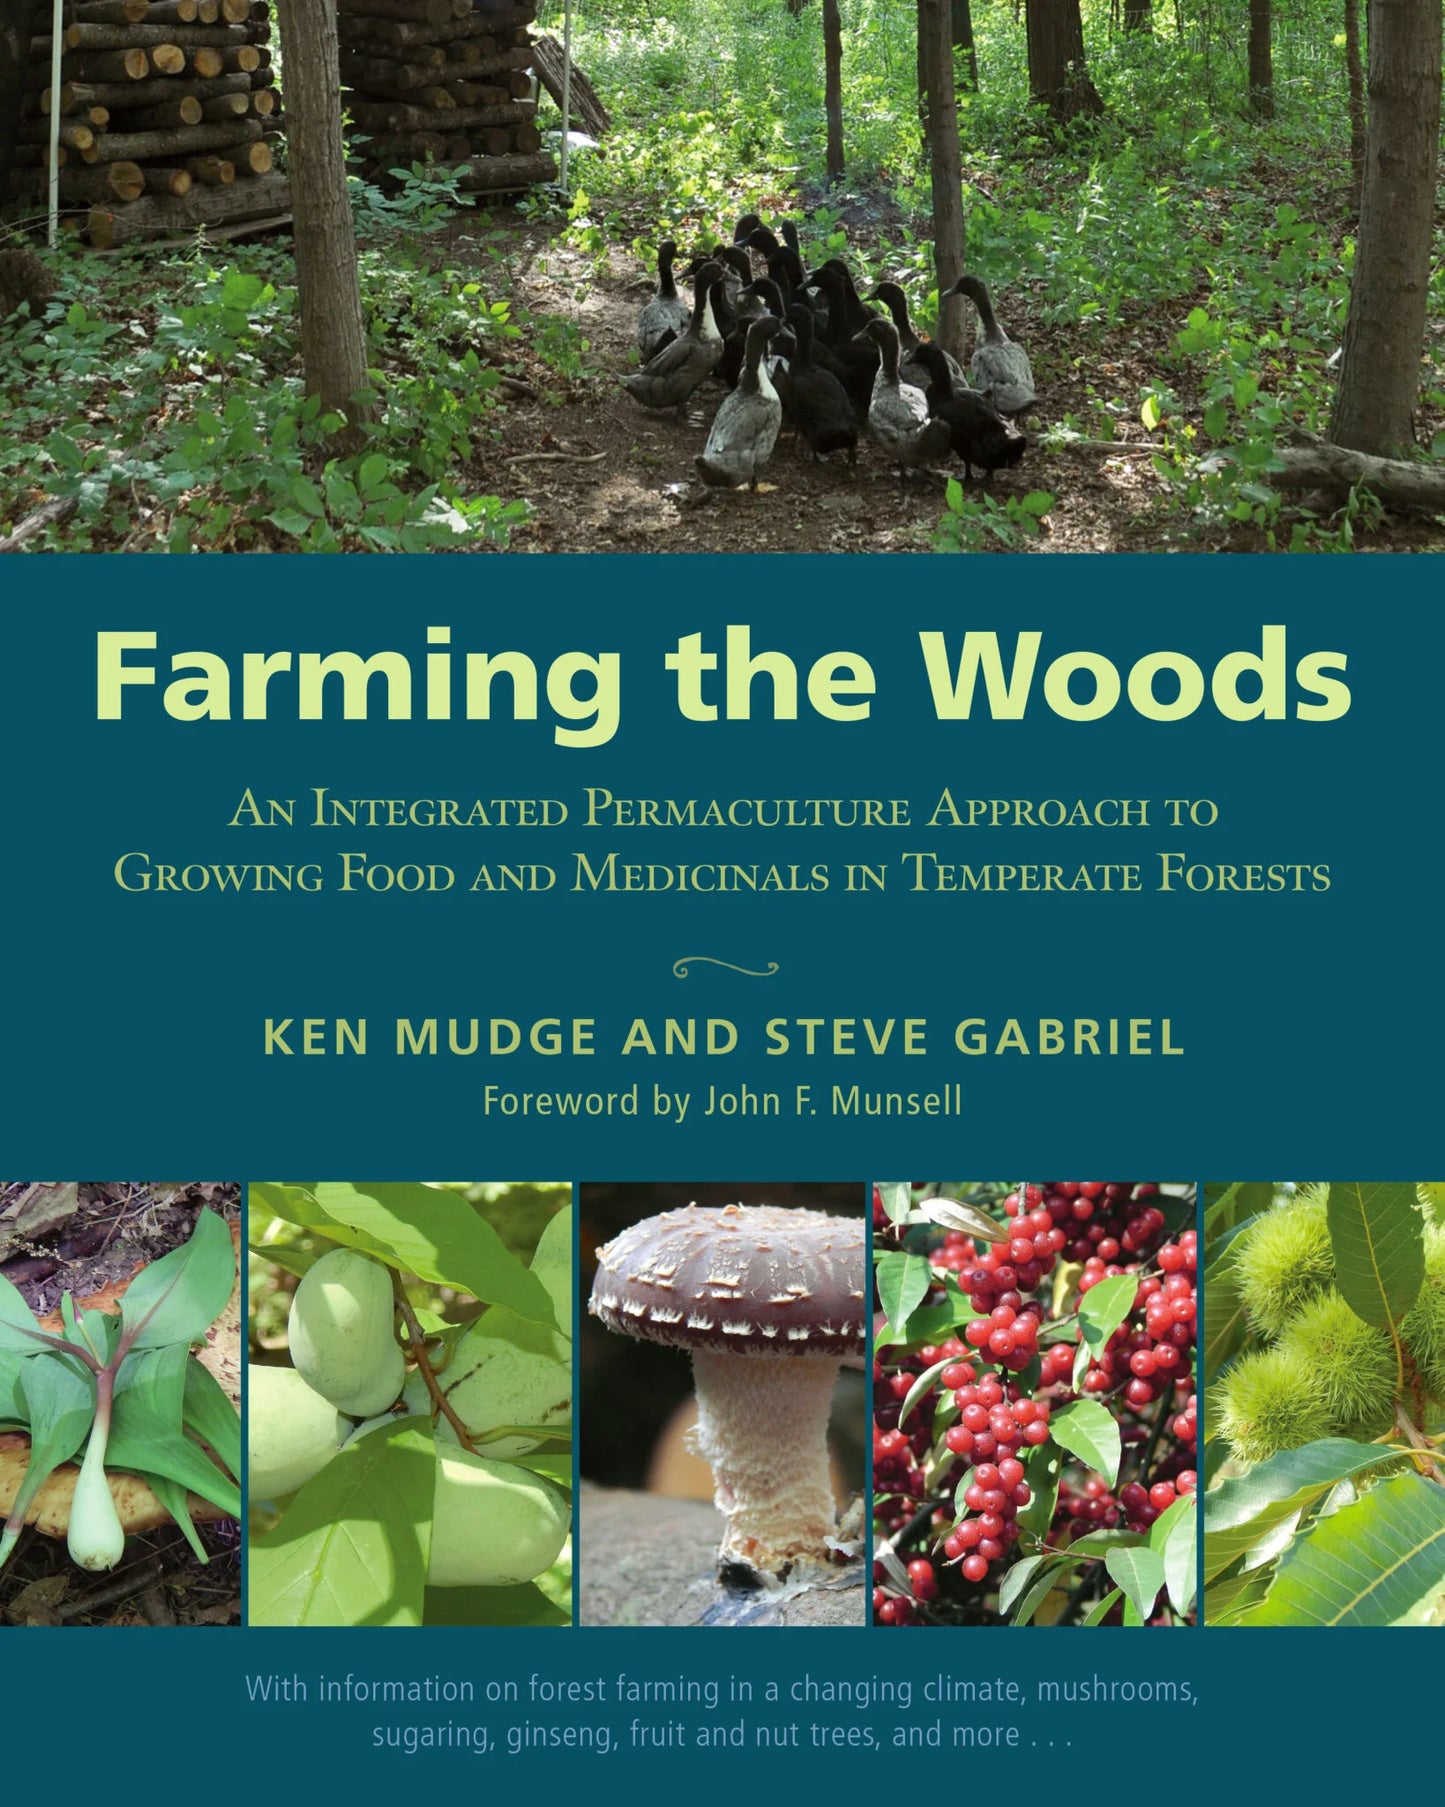 Farming the Woods  An Integrated Permaculture Approach to Growing Food and Medicinals in Temperate Forests by Steve Gabriel & Ken Mudge